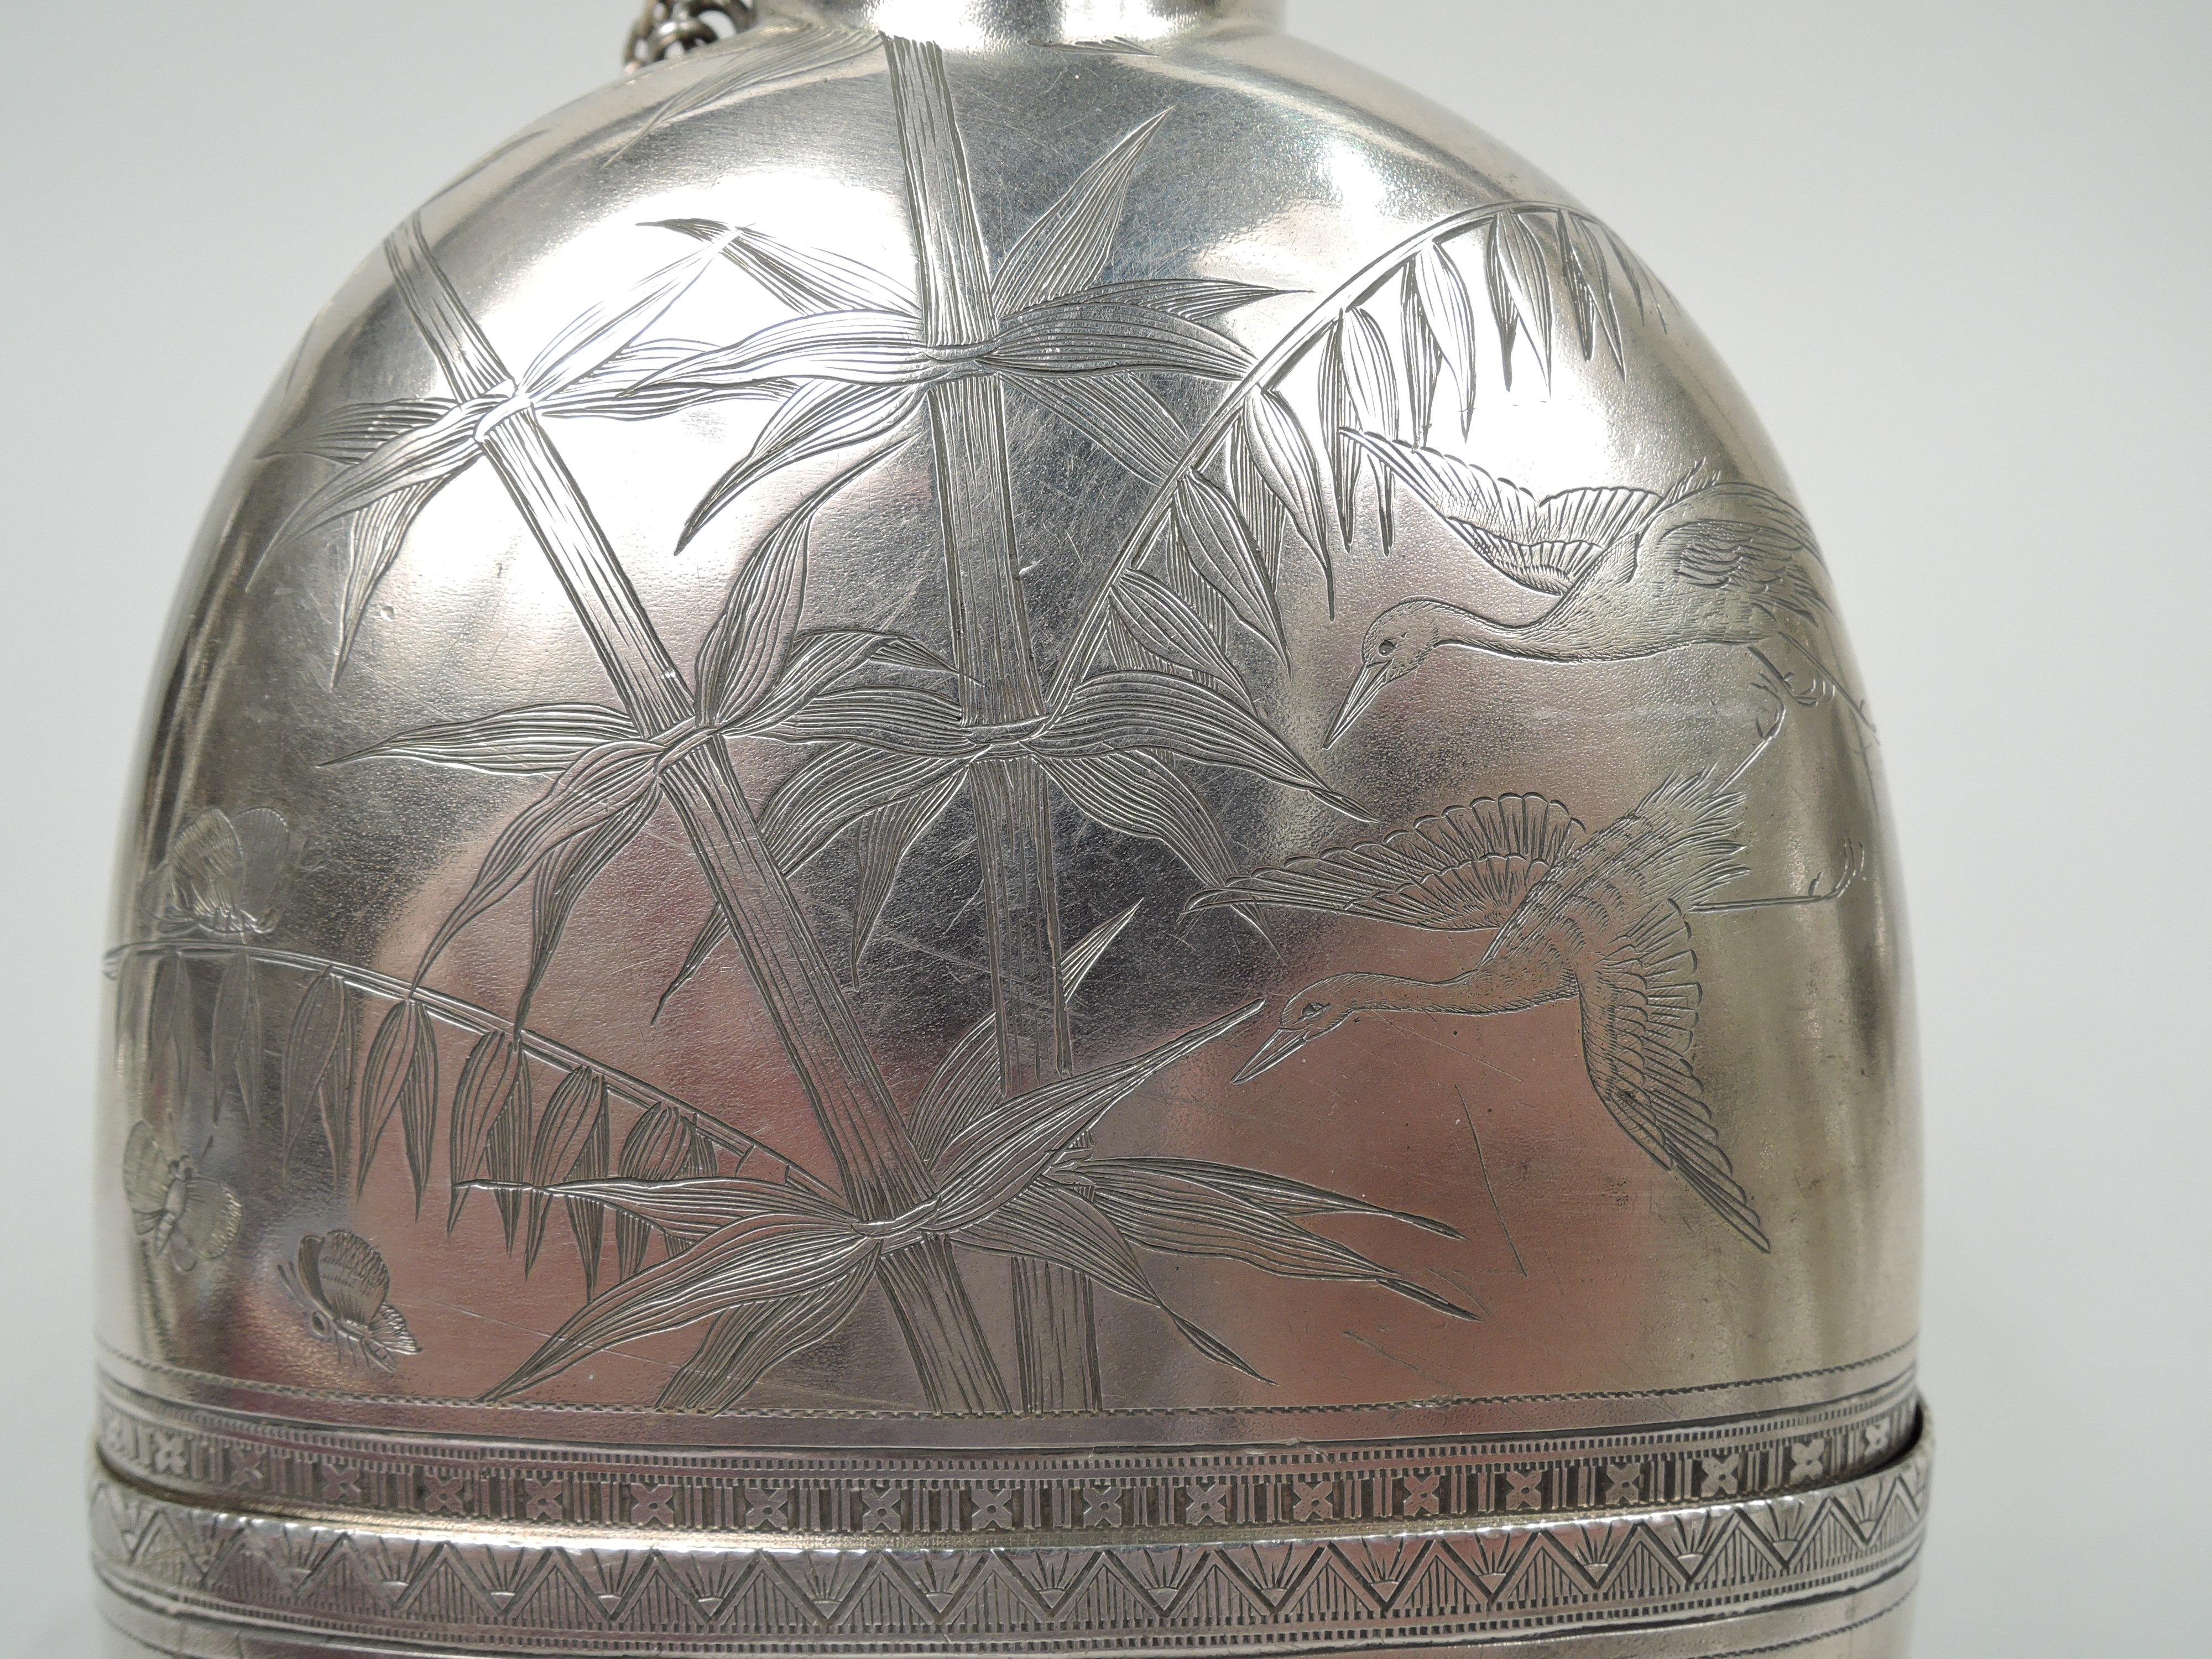 Gorgeous Gorham Japonesque Sterling Silver Flask with Cranes & Bamboo In Excellent Condition For Sale In New York, NY